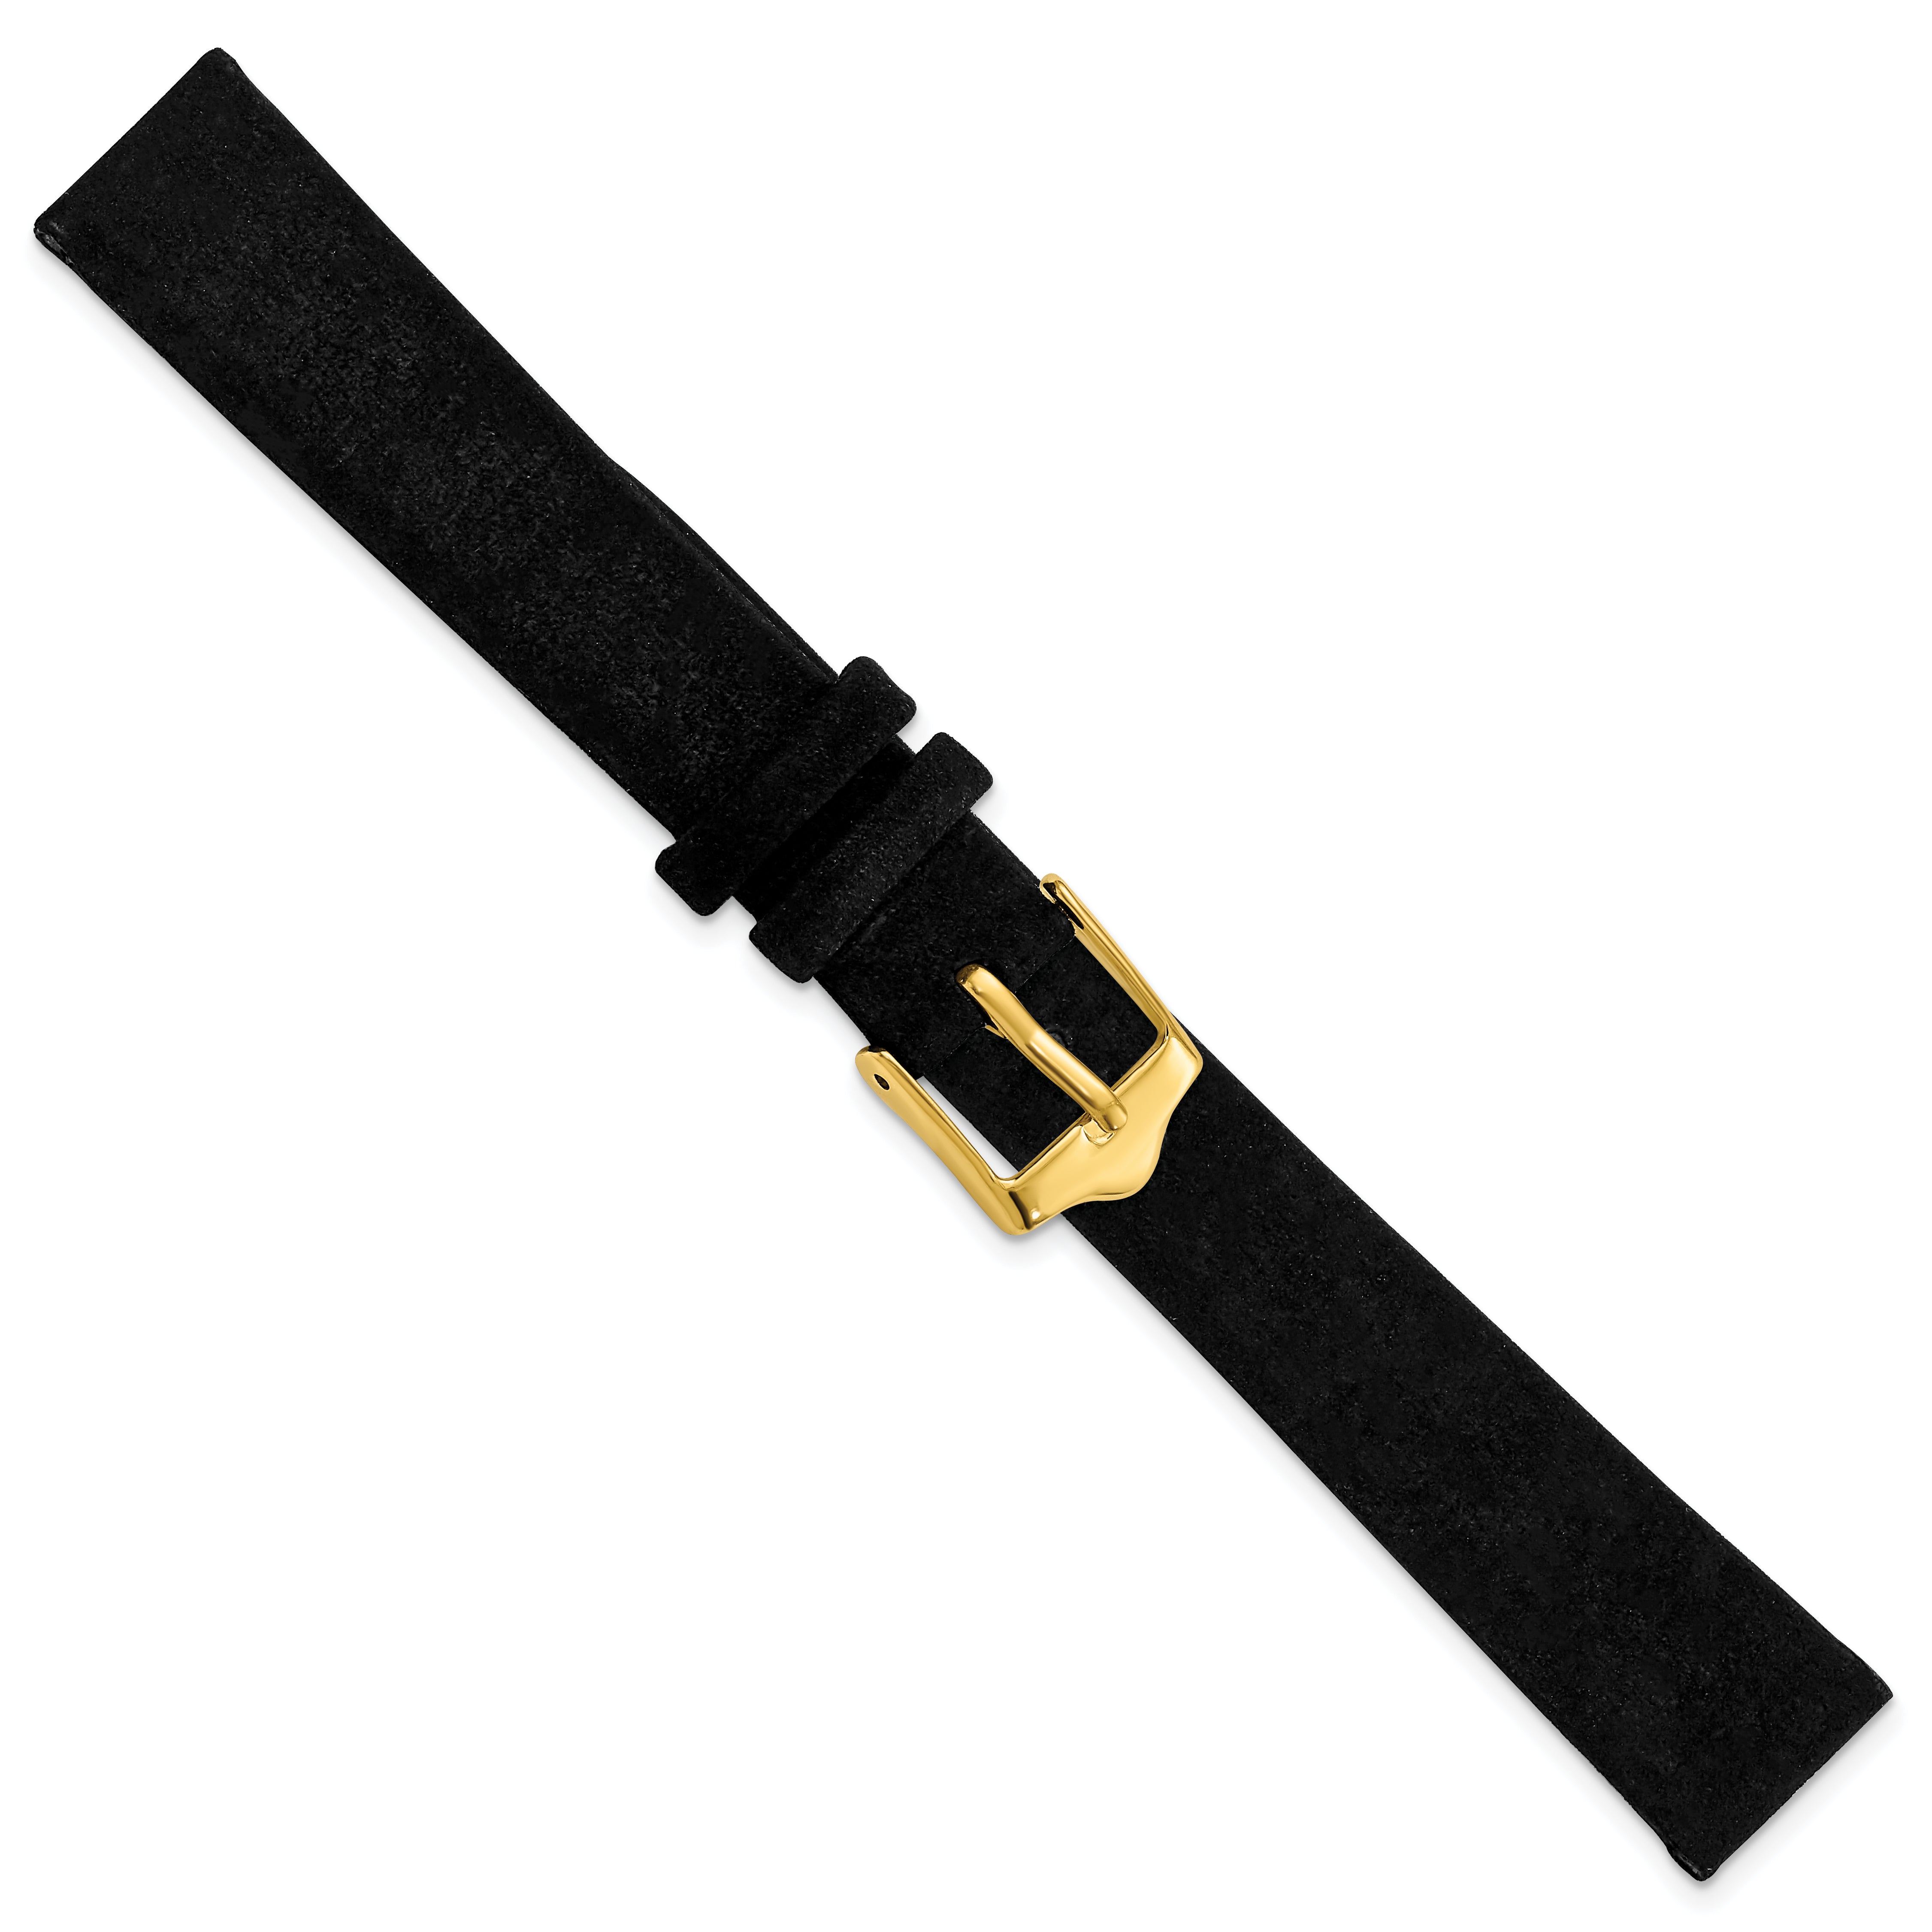 12mm Black Suede Flat Leather with Gold-tone Buckle 6.75 inch Watch Band